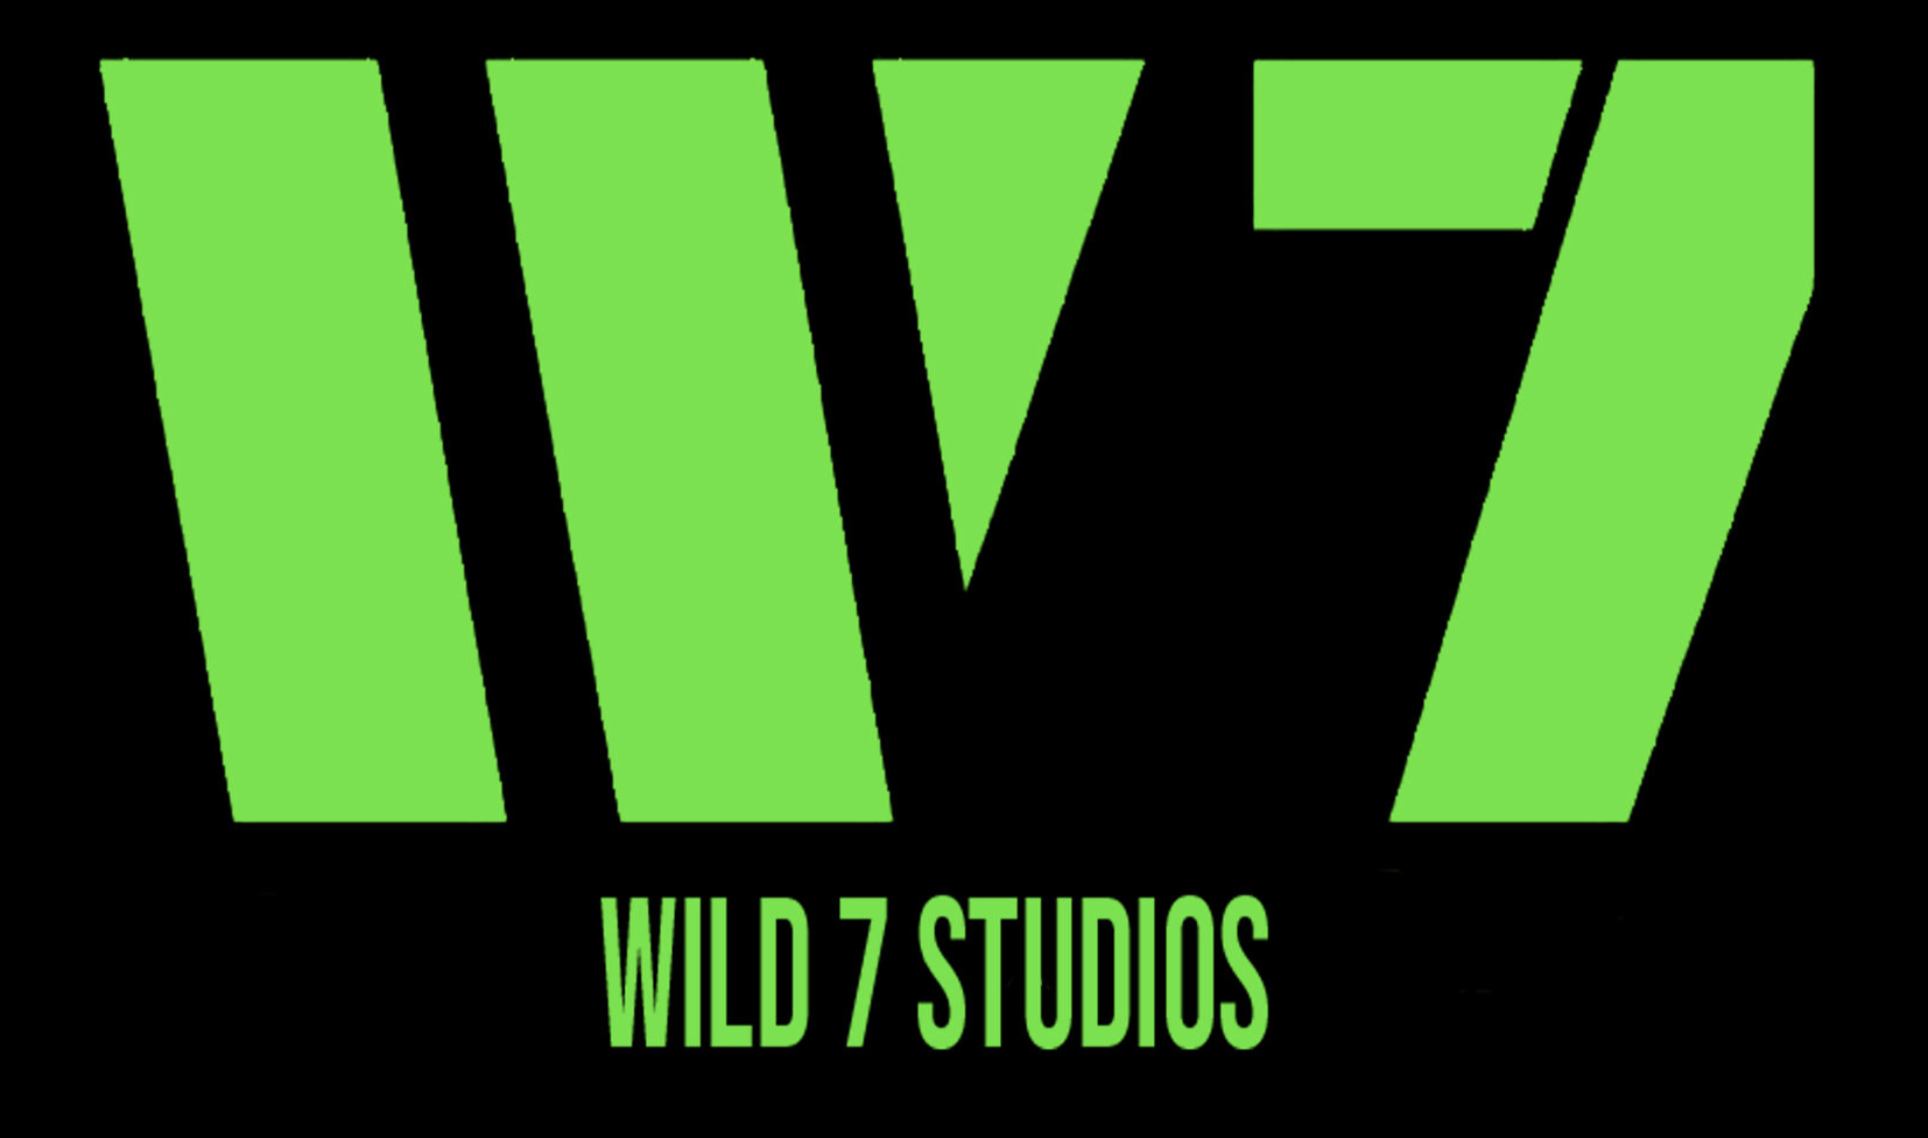 Wild 7 Studios Sticker for iOS & Android